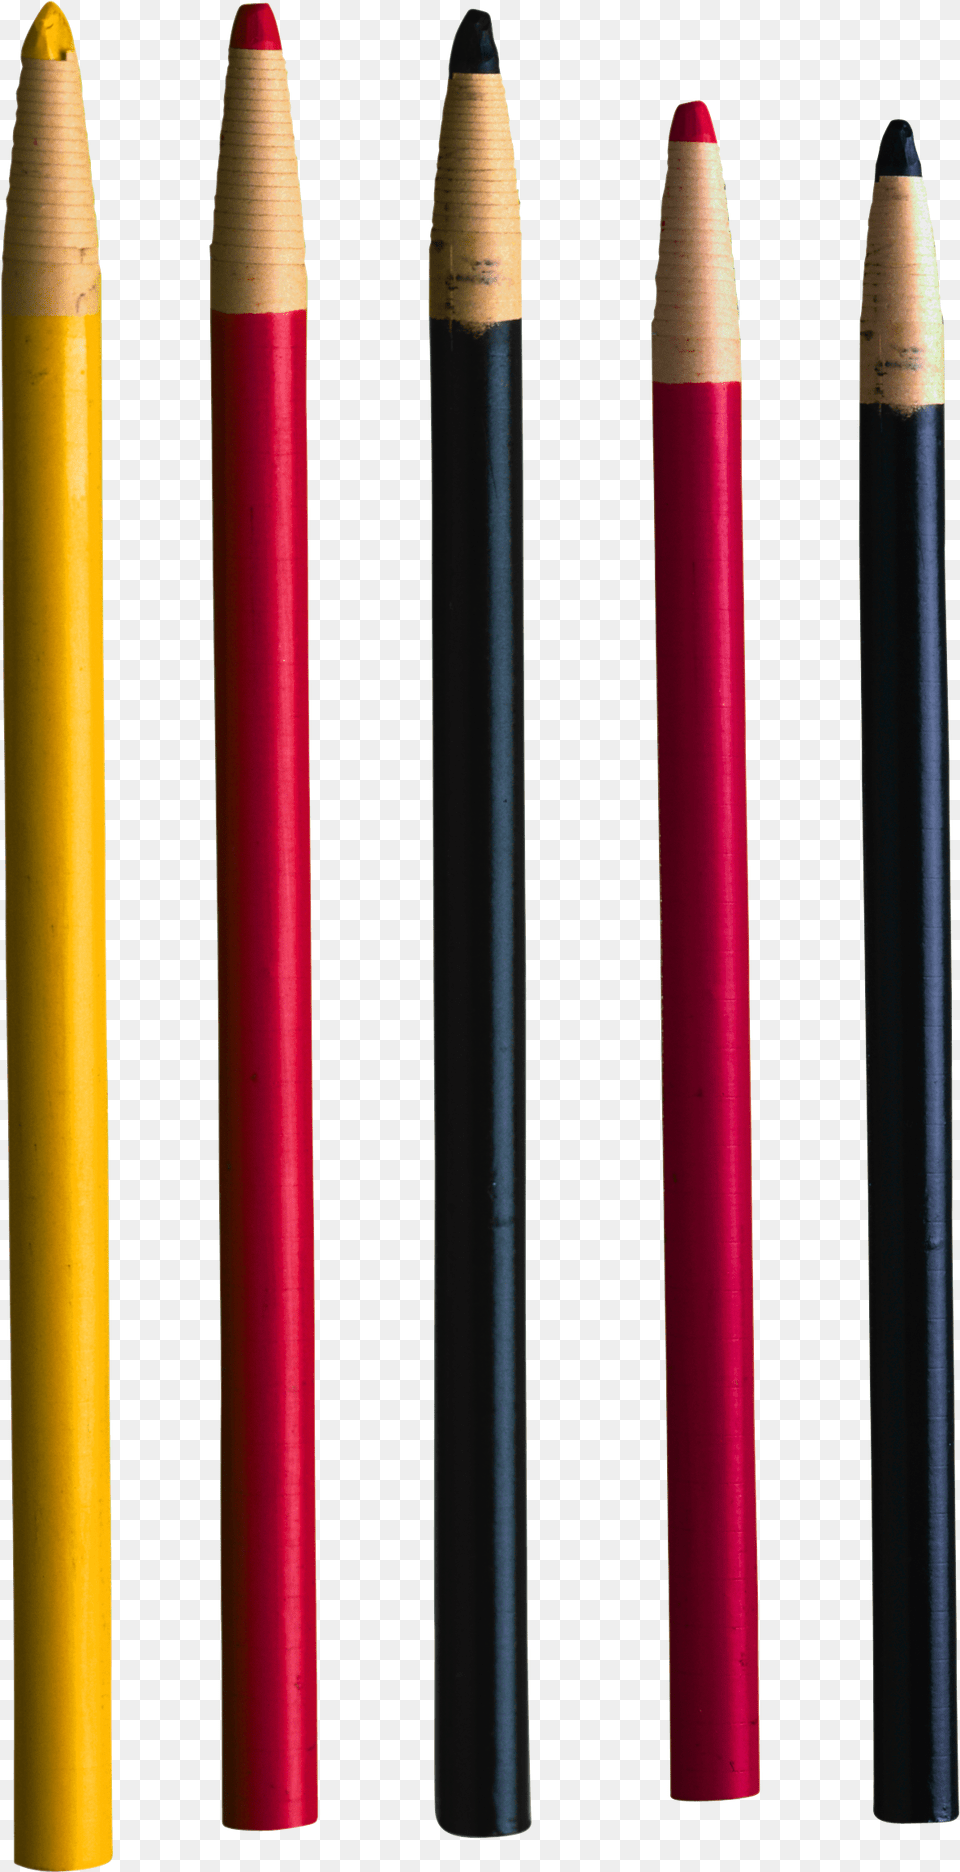 Pencil Realistic Png Image